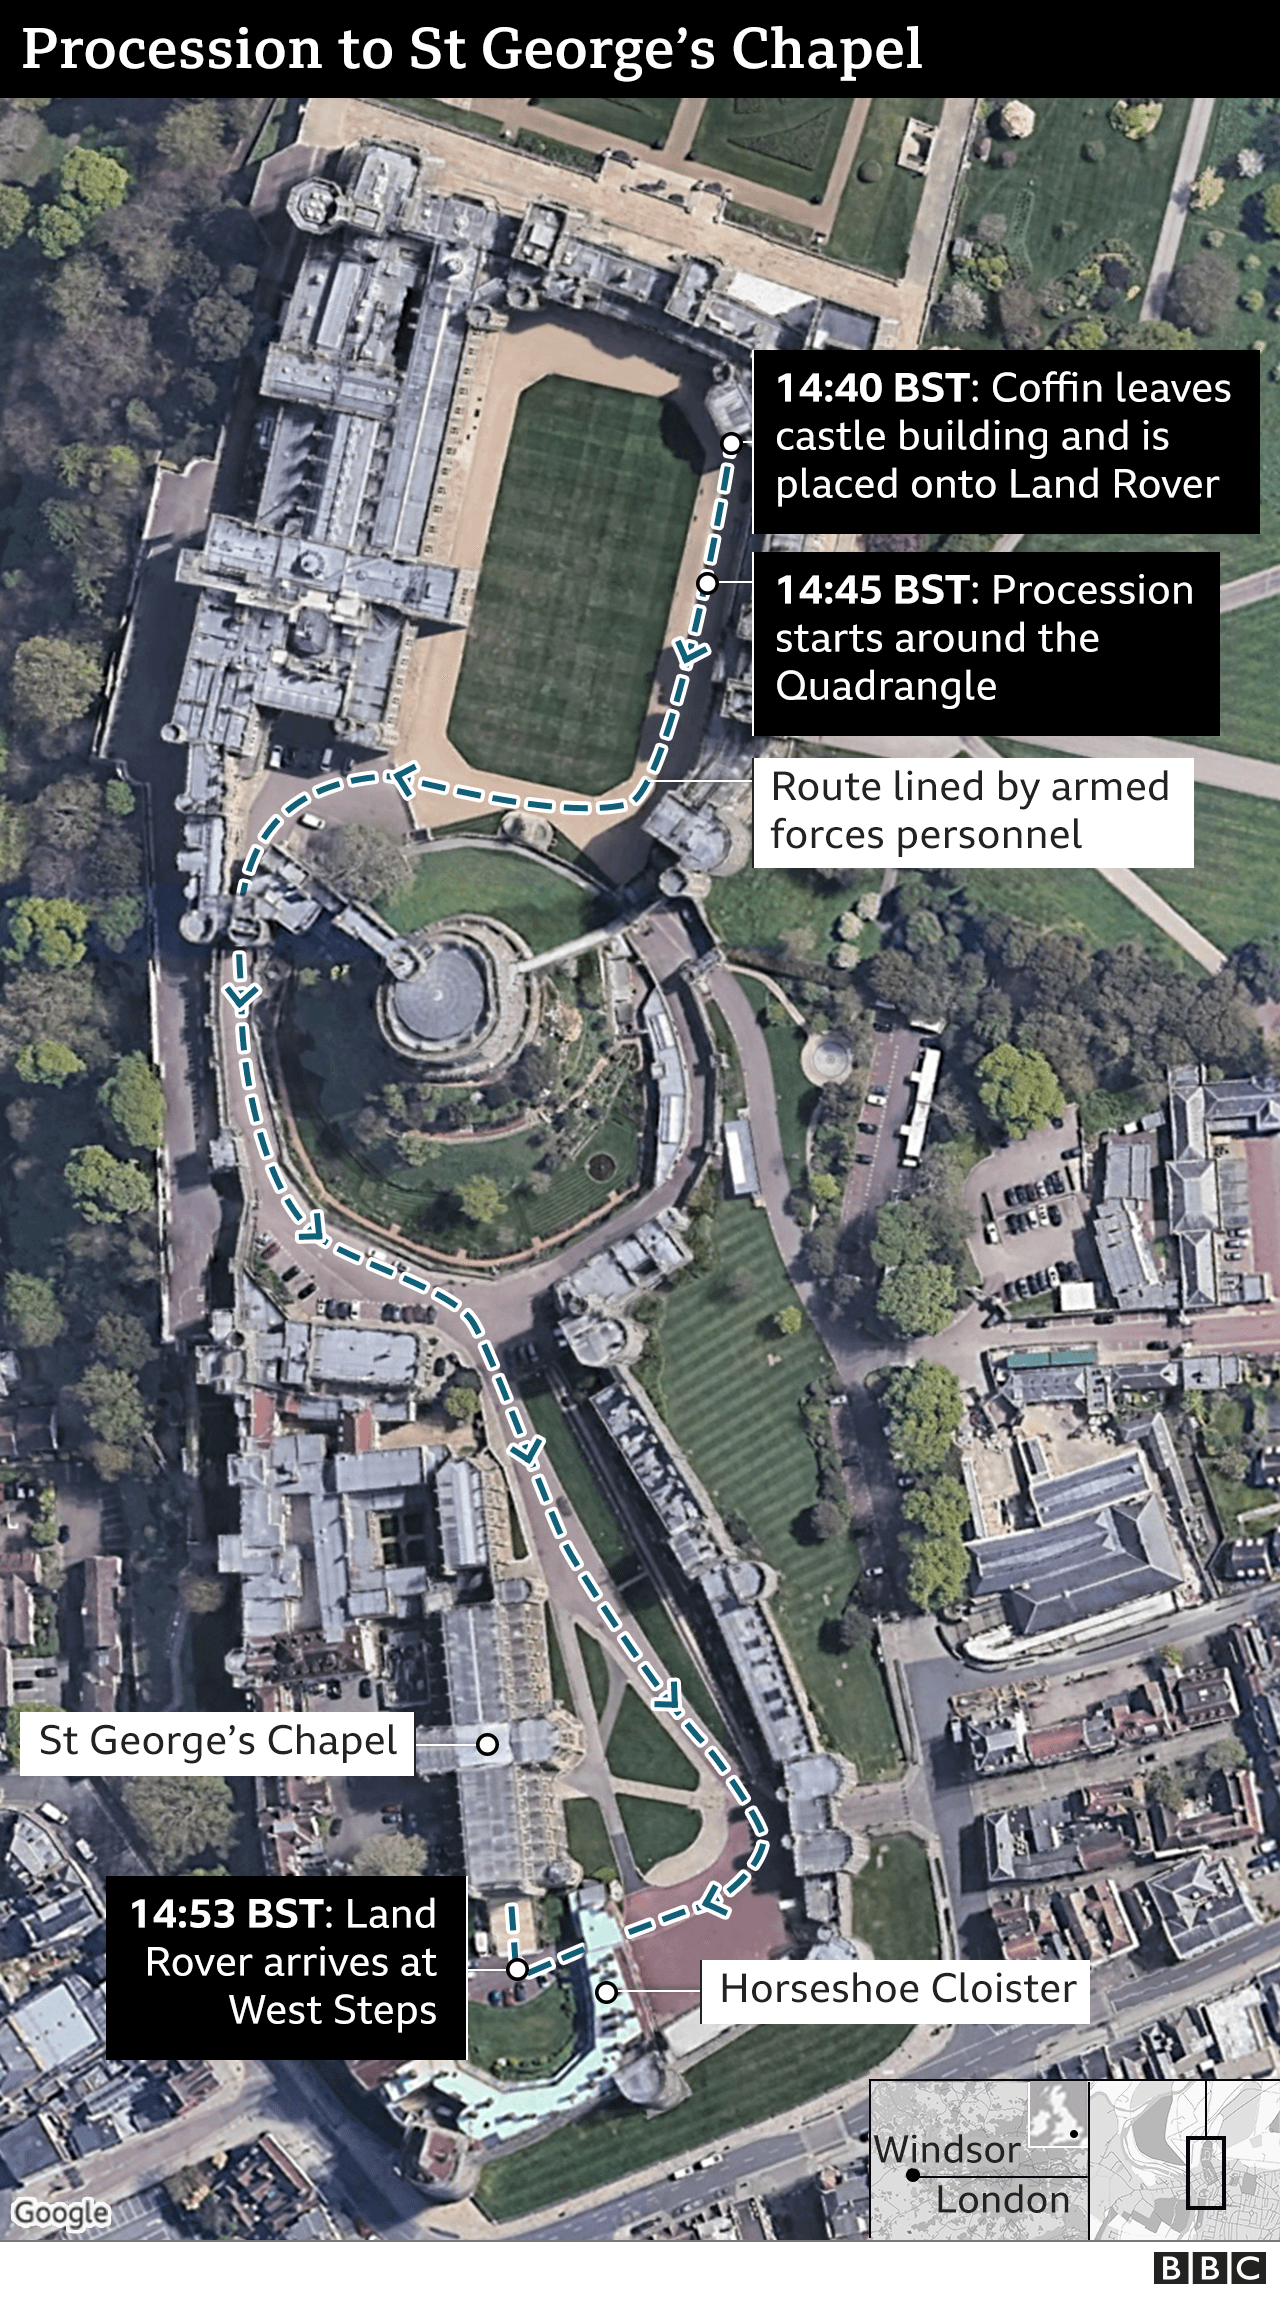 Funeral procession route to St George's Chapel